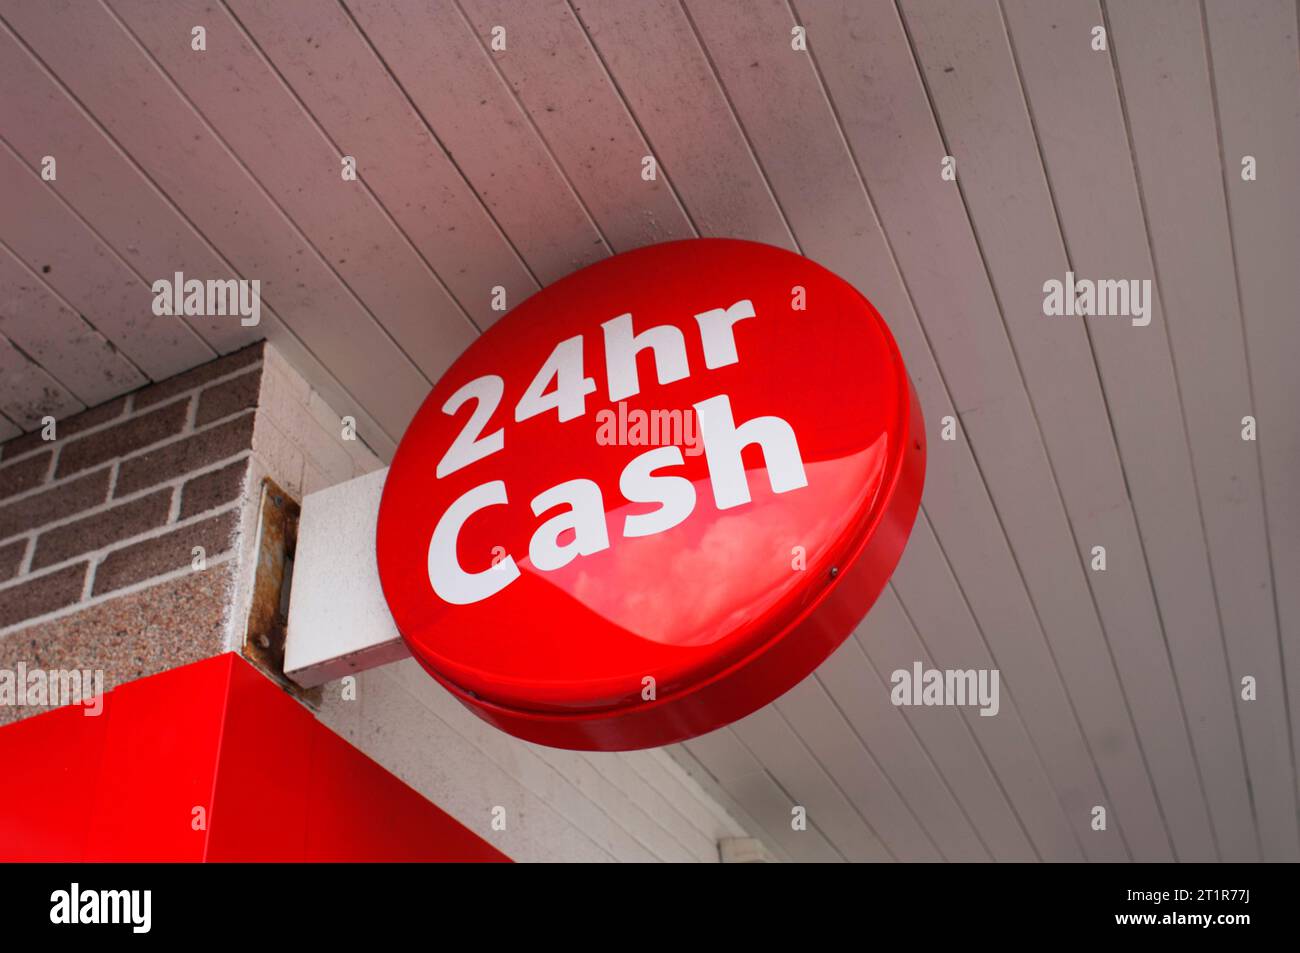 Red sign advertising a nearby ATM machine - John Gollop Stock Photo